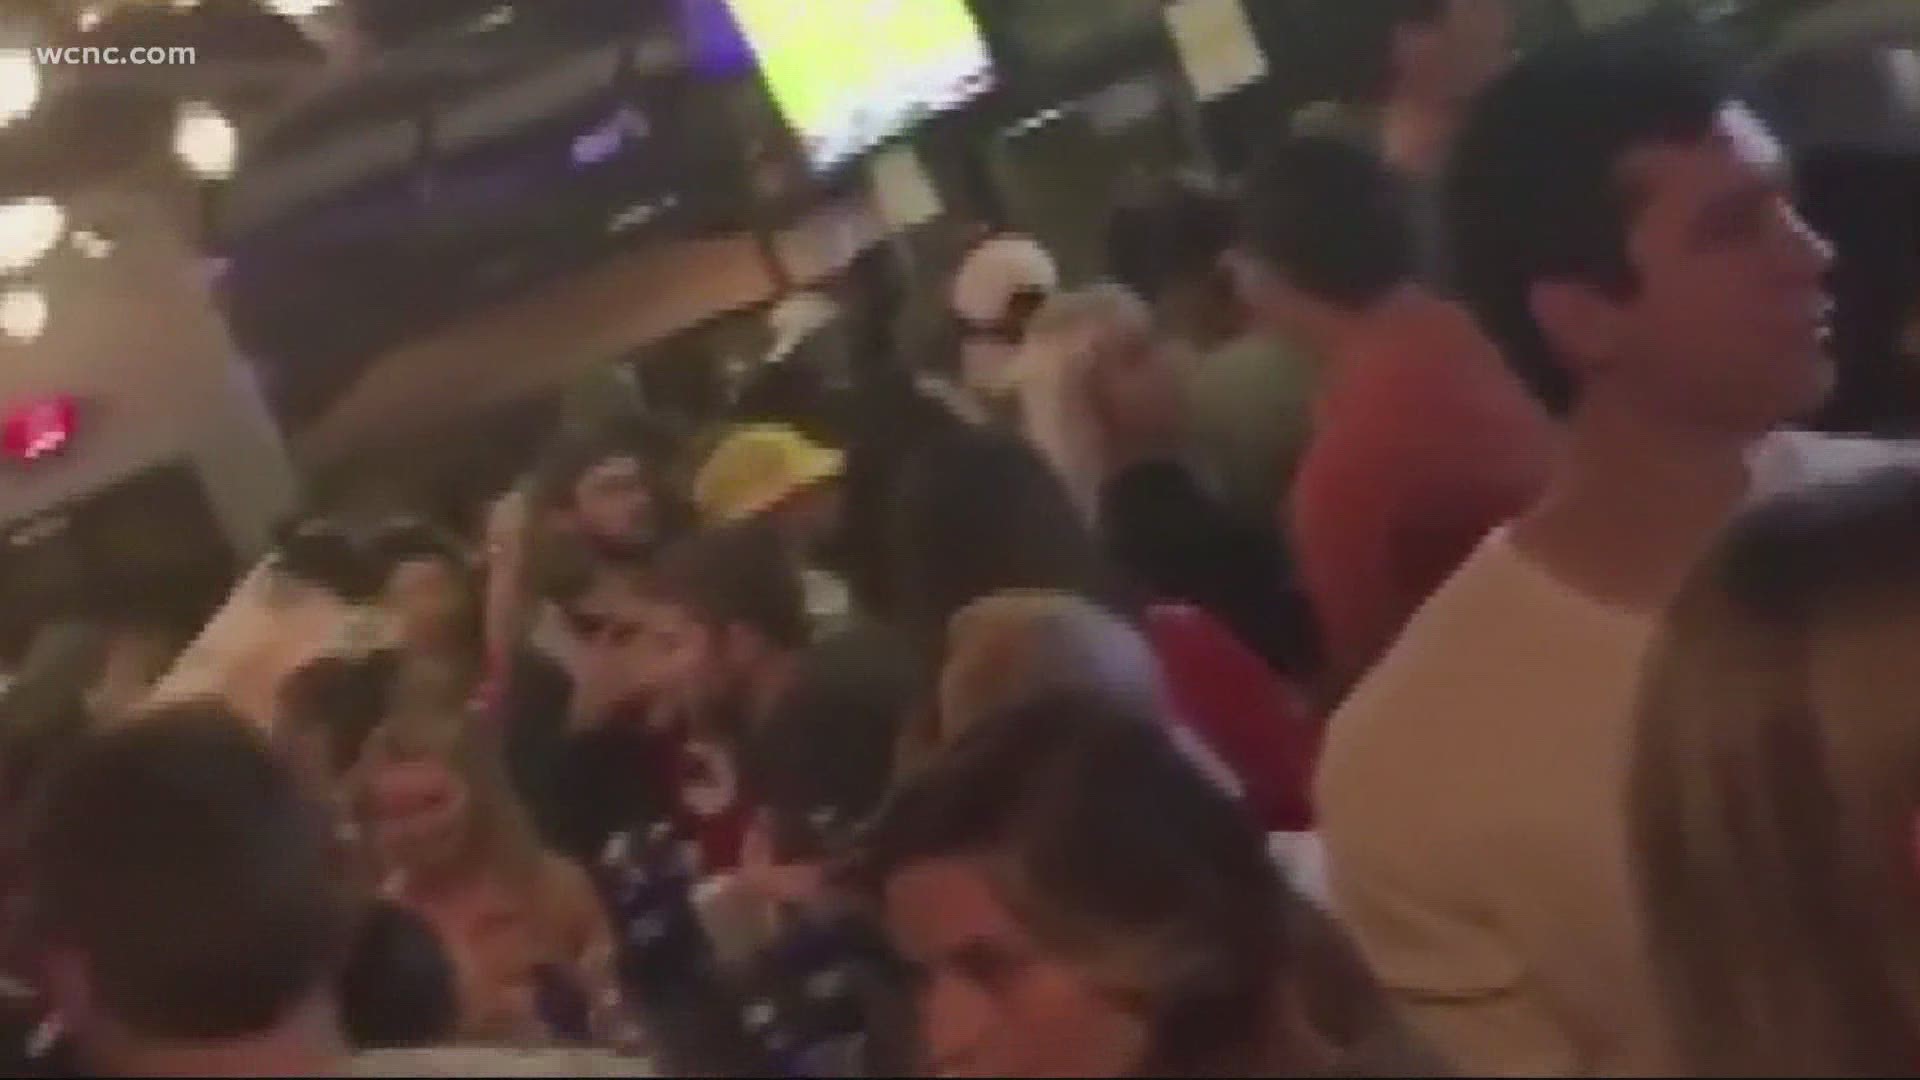 Video shows plenty of people with little to no social distancing at a bar in the Charlotte area. CMPD says arcades, hookah lounges and bars are all on their radar.